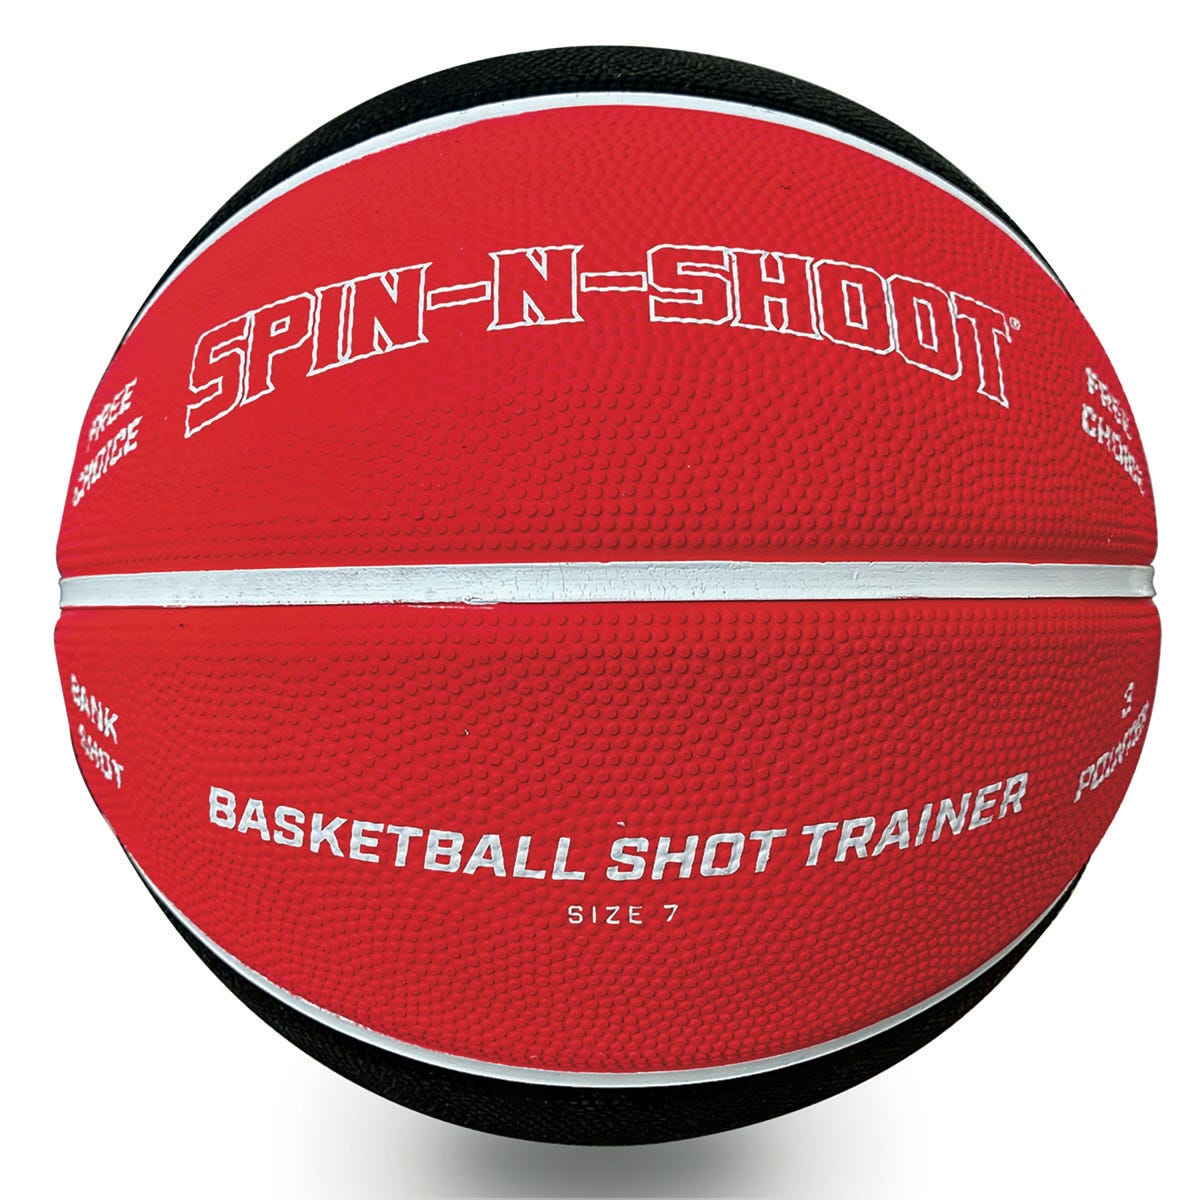 Spin-N-Shoot Trainer Basketball Size 7